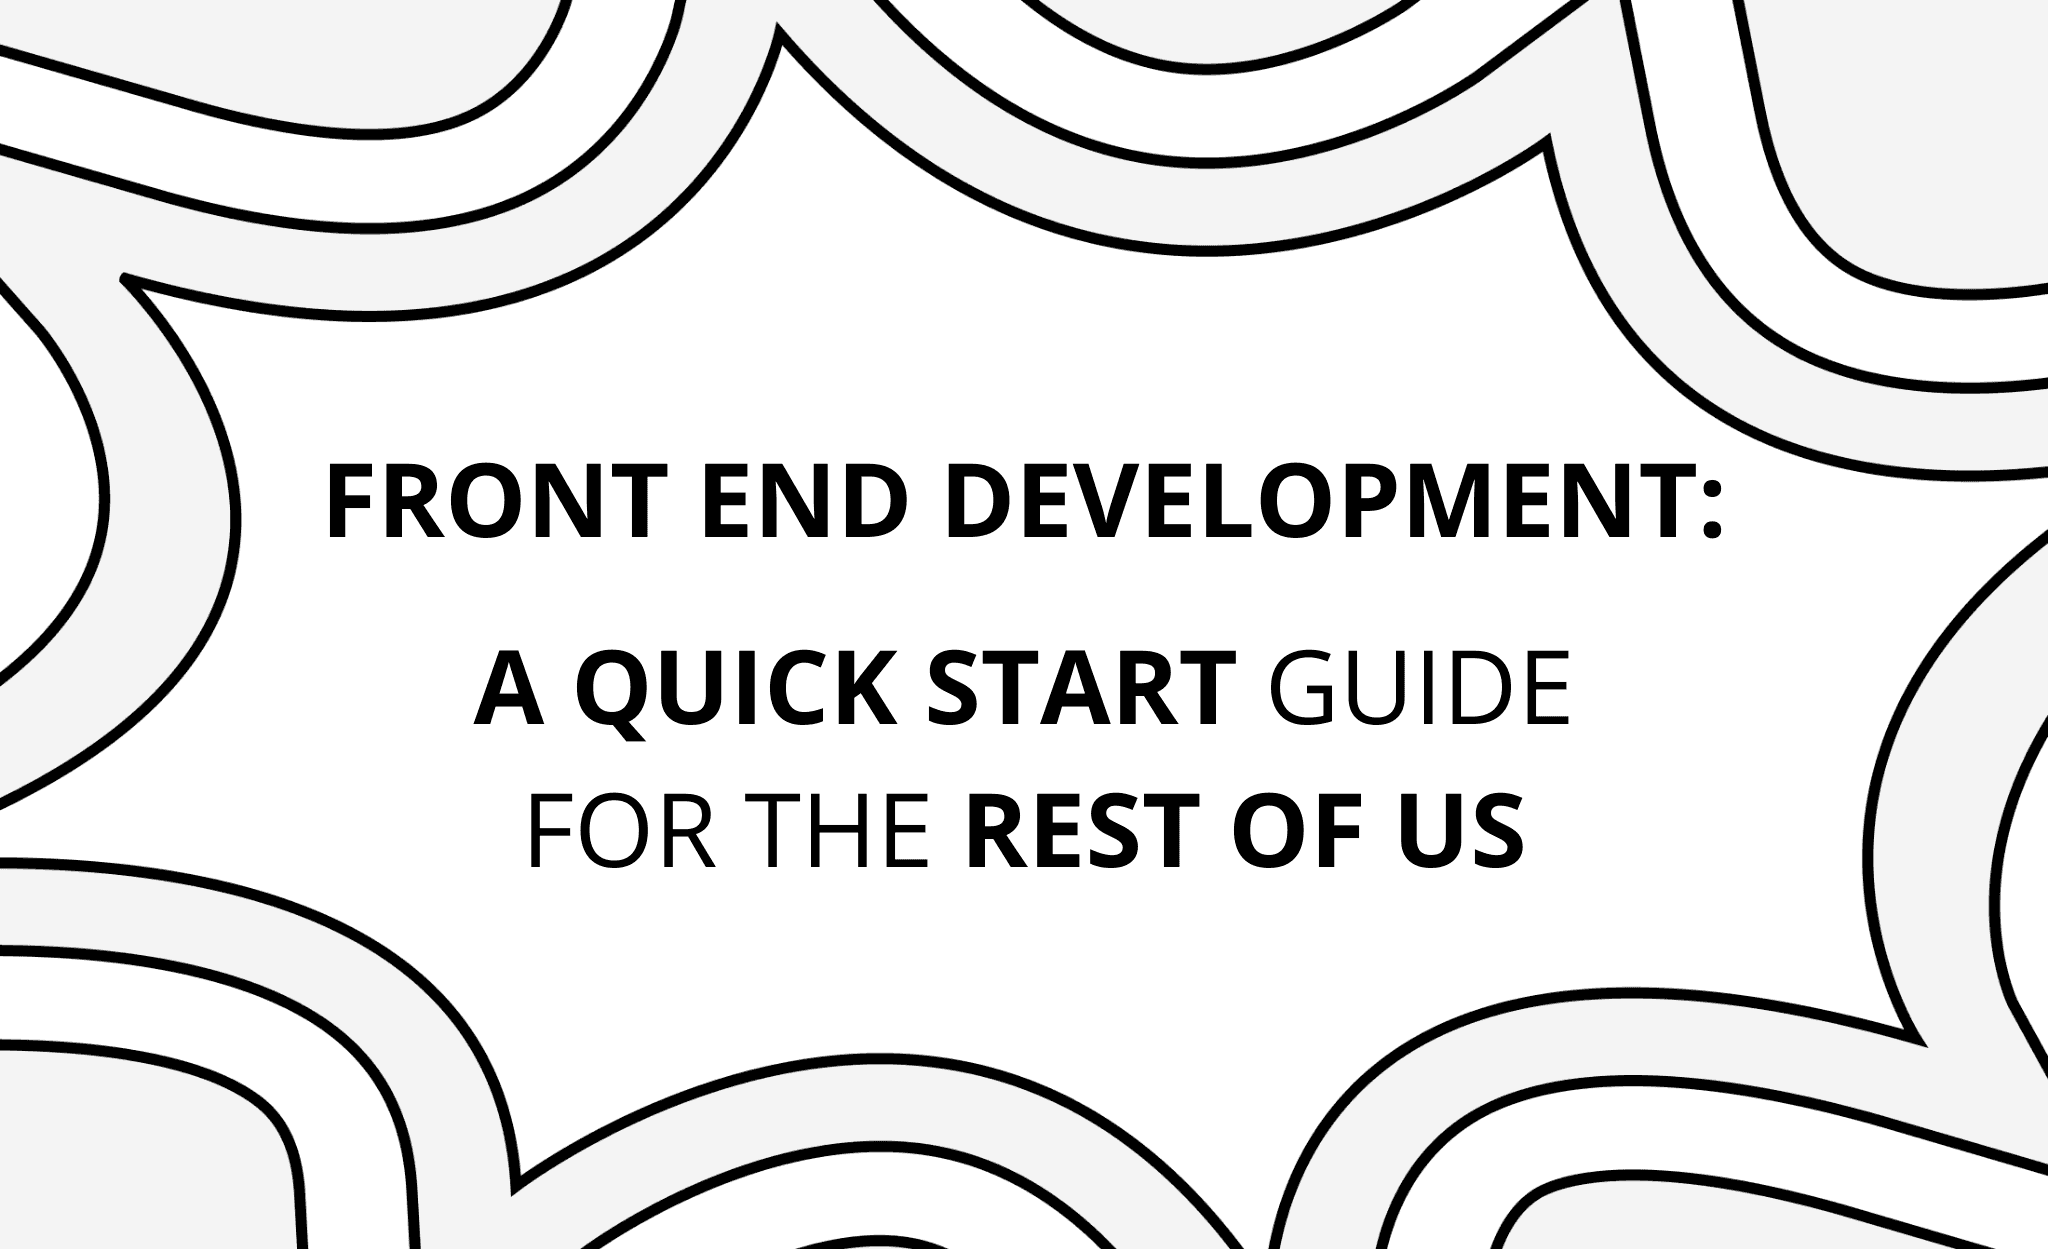 Frontend Development: A Quick Start Guide for the Rest of Us